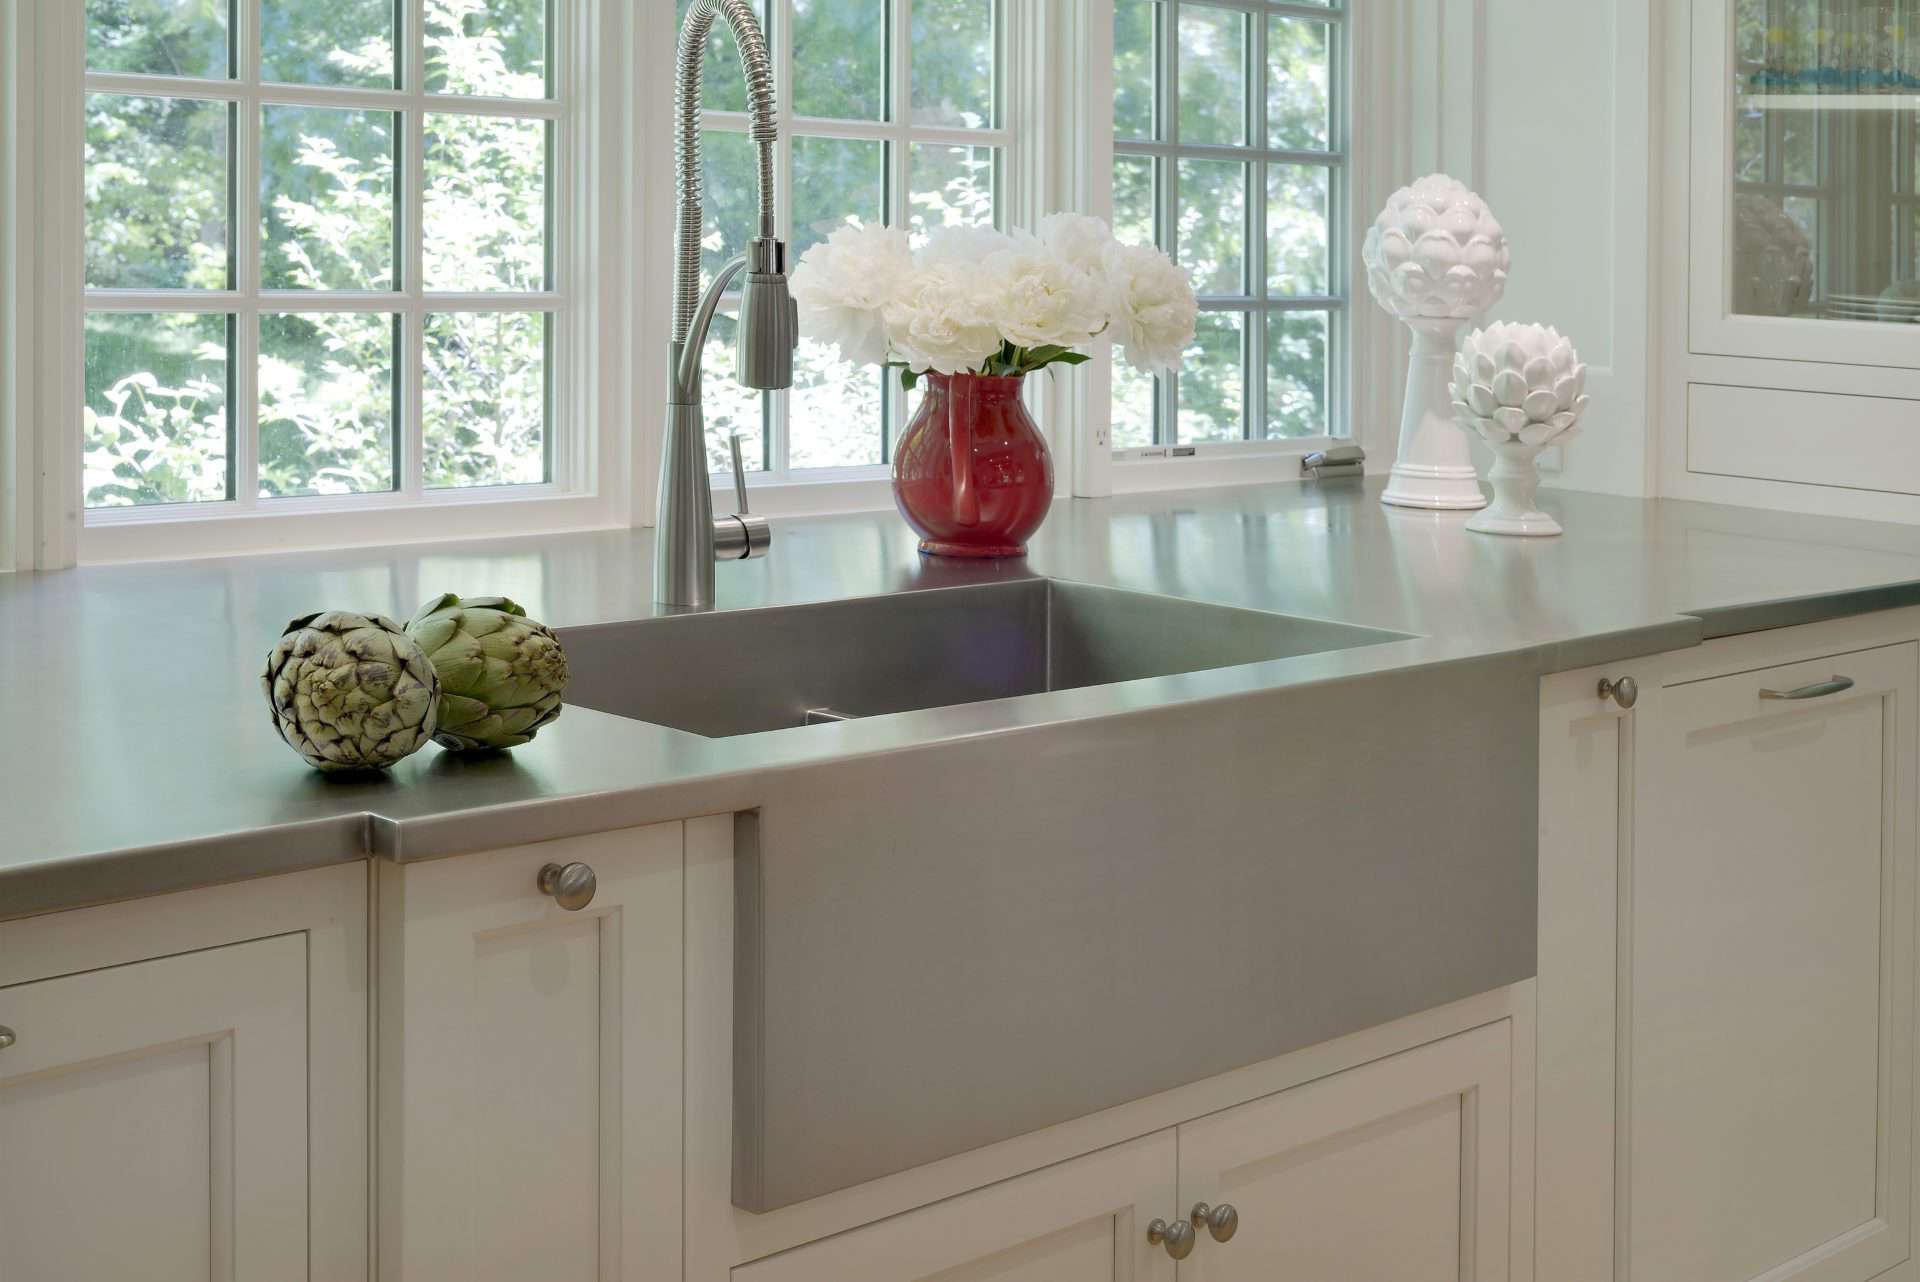 Waccabuc kitchen features  white Bilotta cabinetry and stainless countertop.